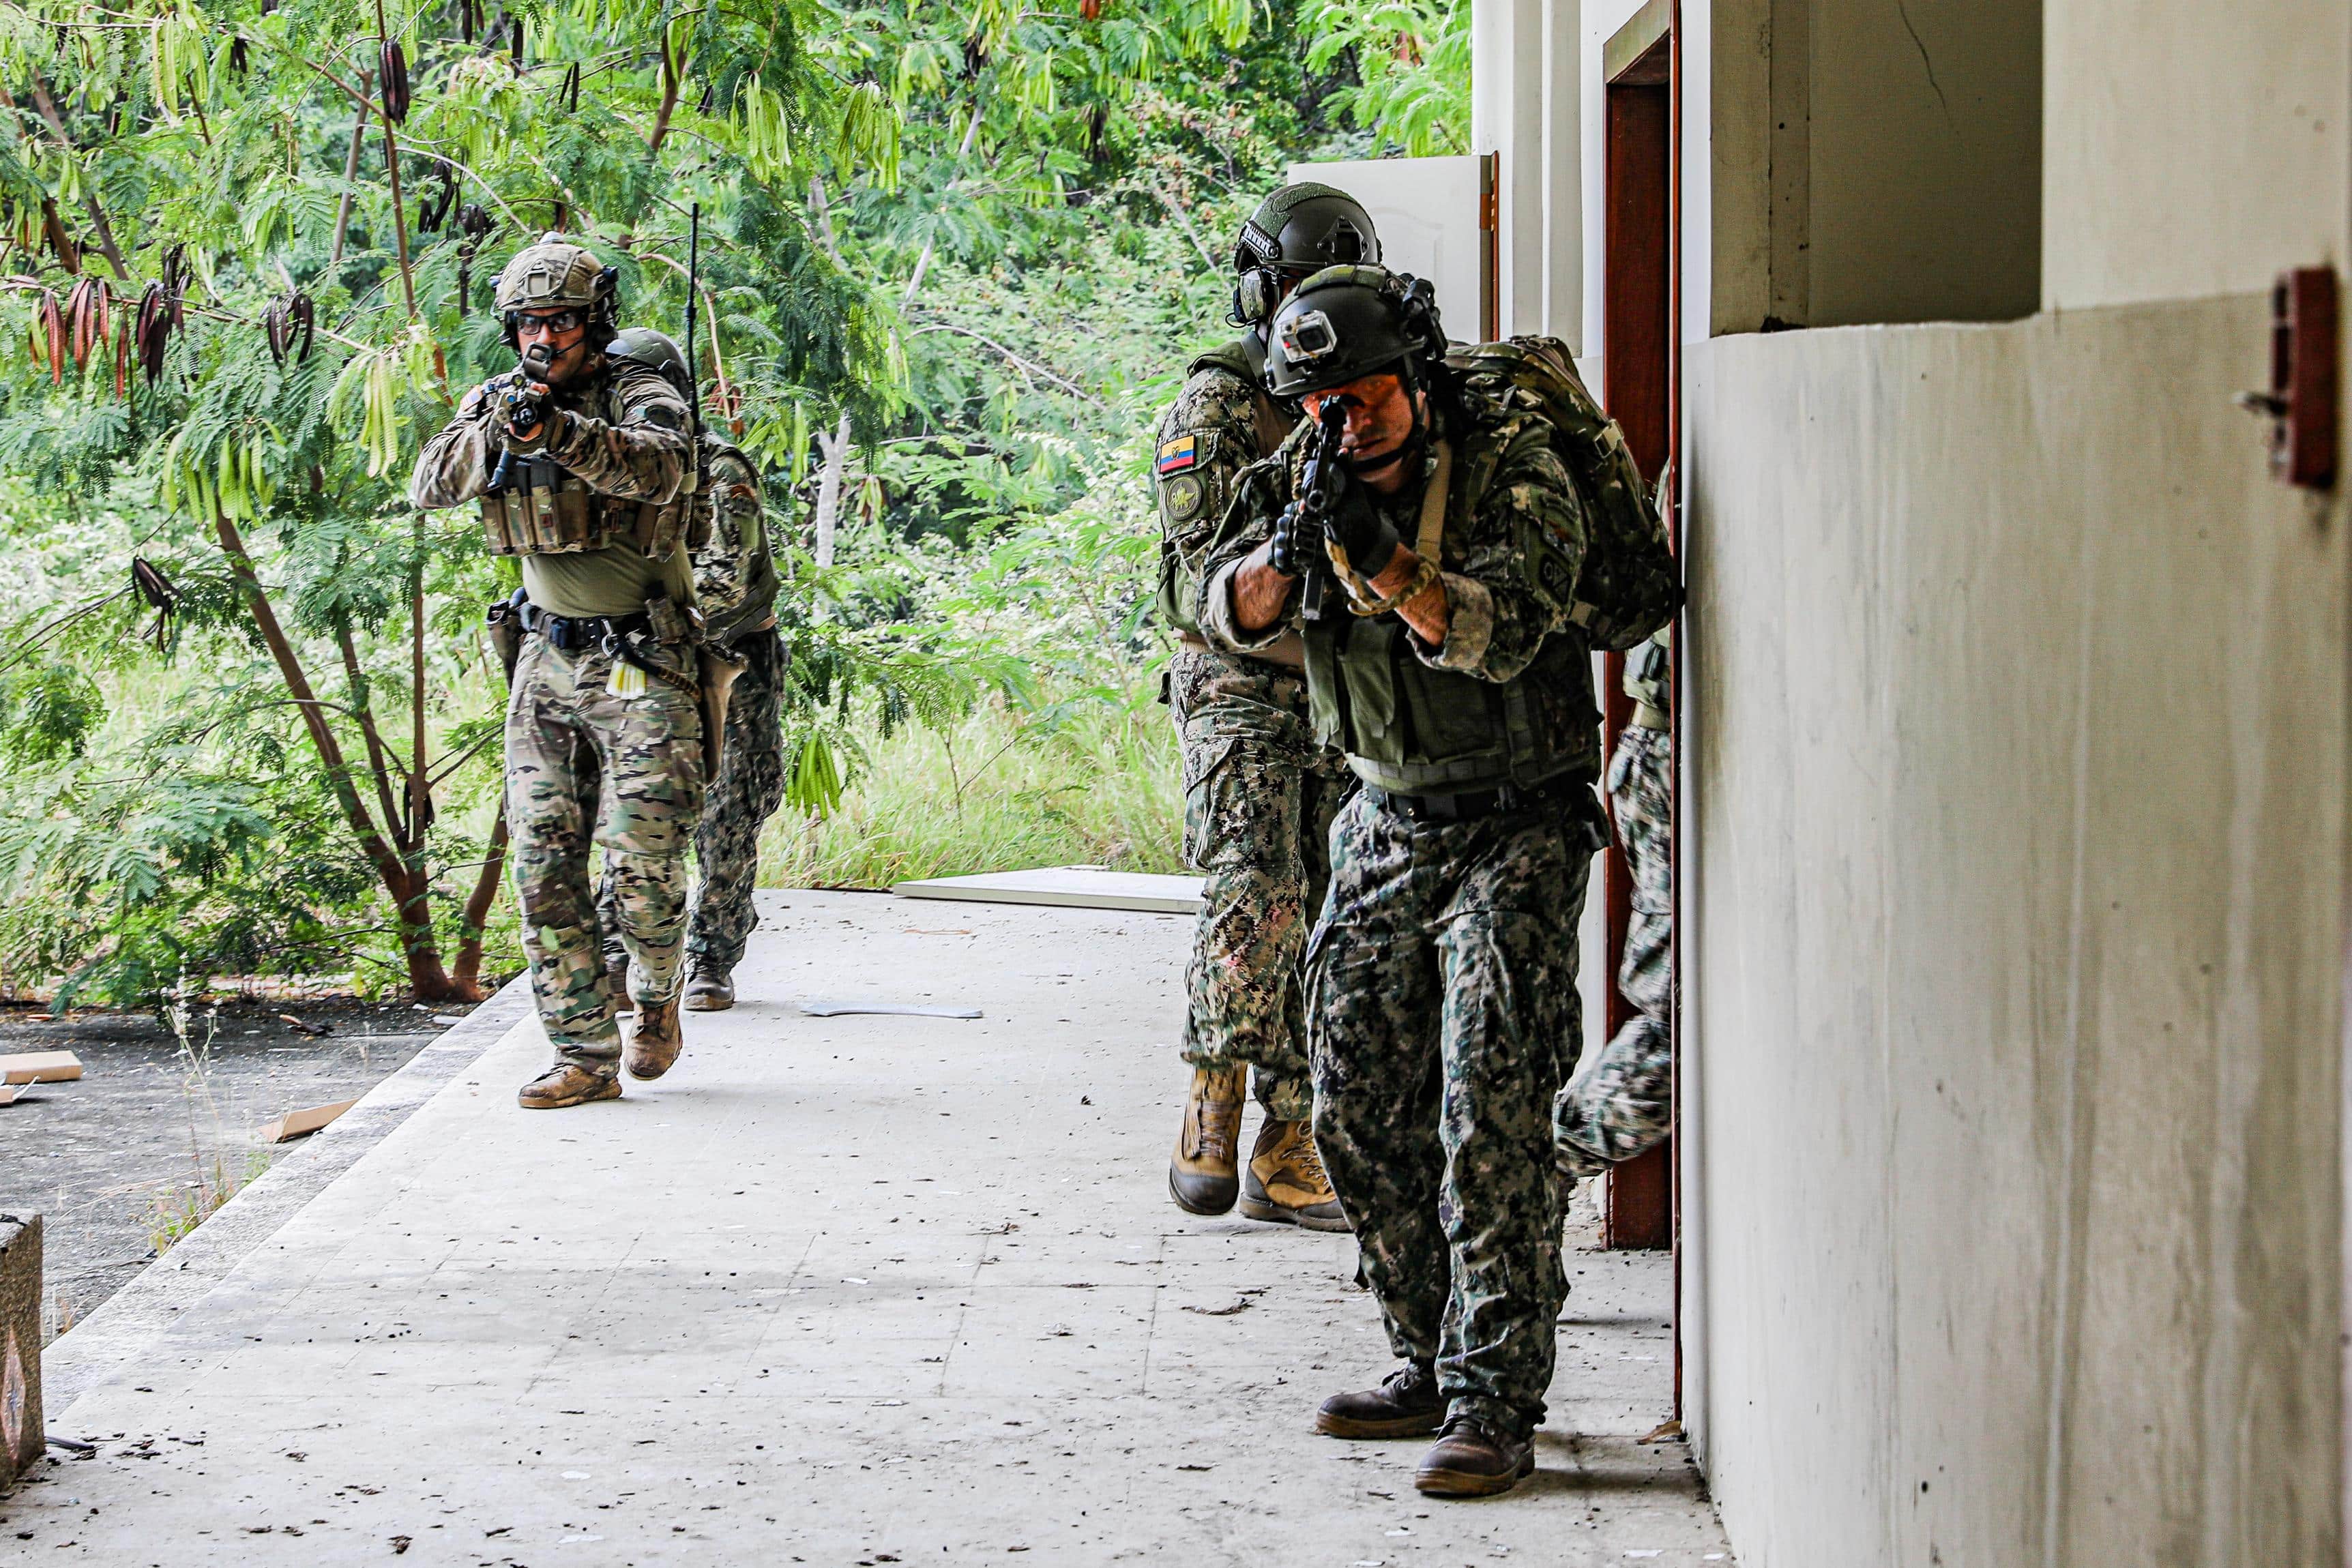 U.S. and Ecuadorian Special Forces breach and clear a shoot house during close quarter combat training for a culminating exercise in Ecuador on May 21, 2022. The overall exercise promotes military-to-military relationships, increases mission readiness, and improves regional security.